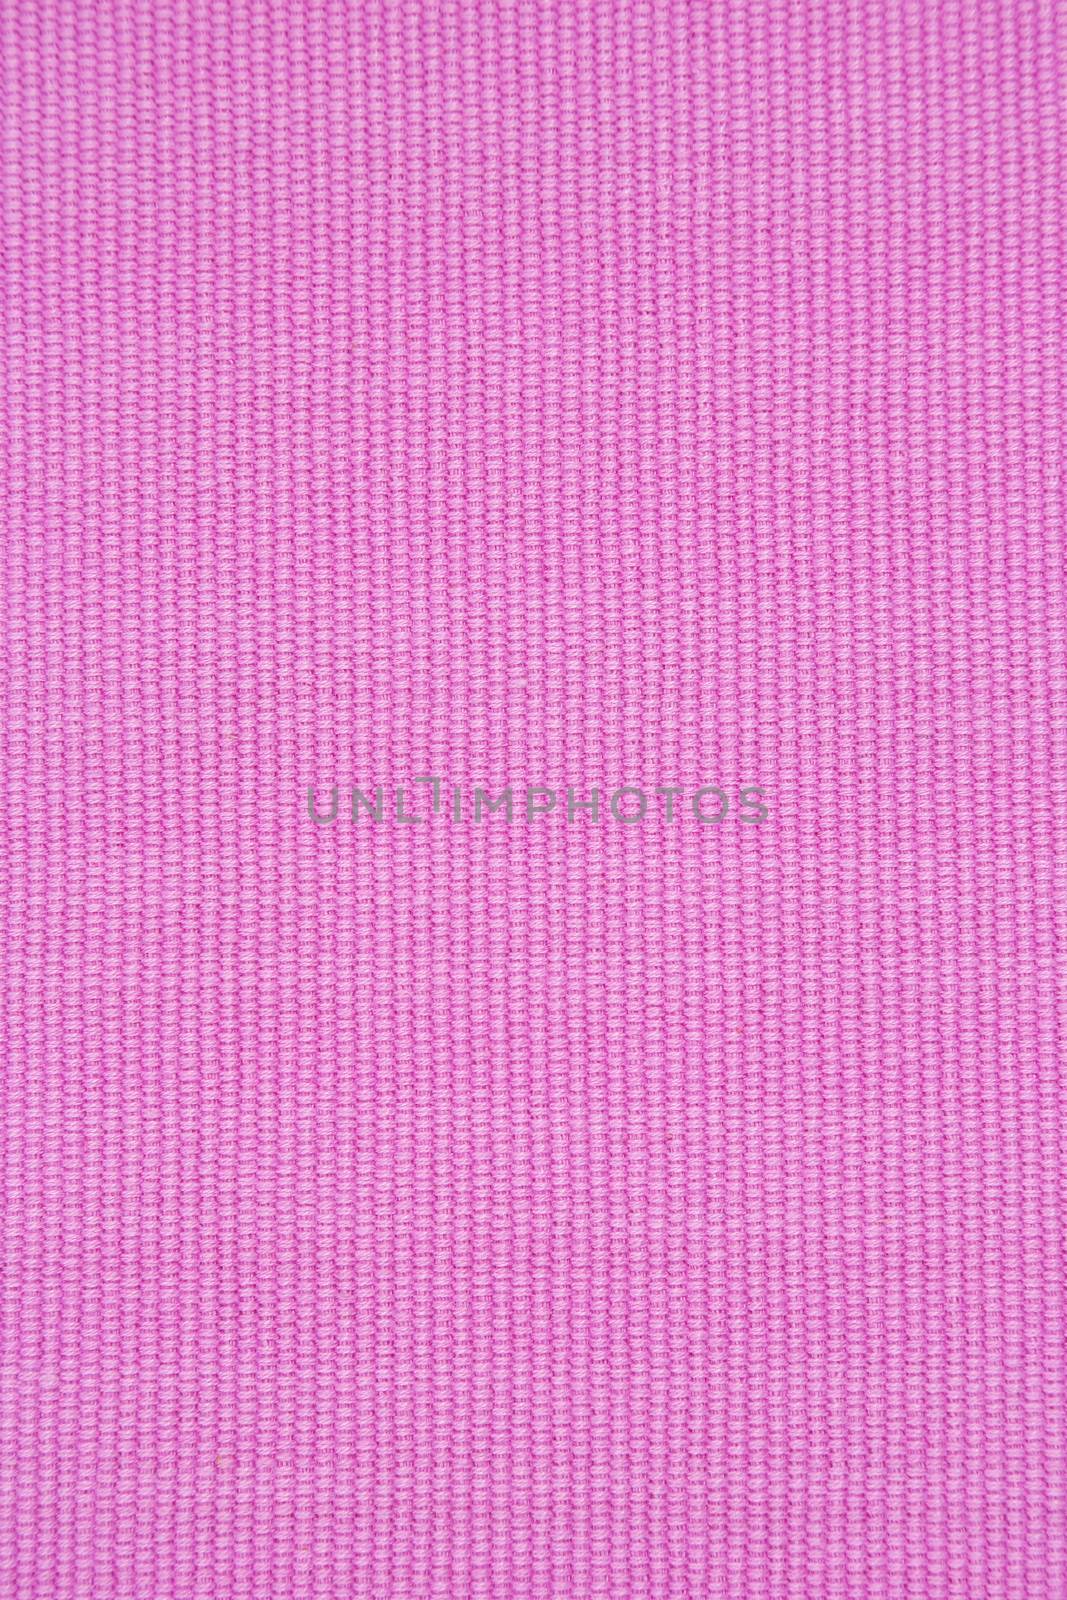 Ribbed pink cotton placemat texture by Digifoodstock